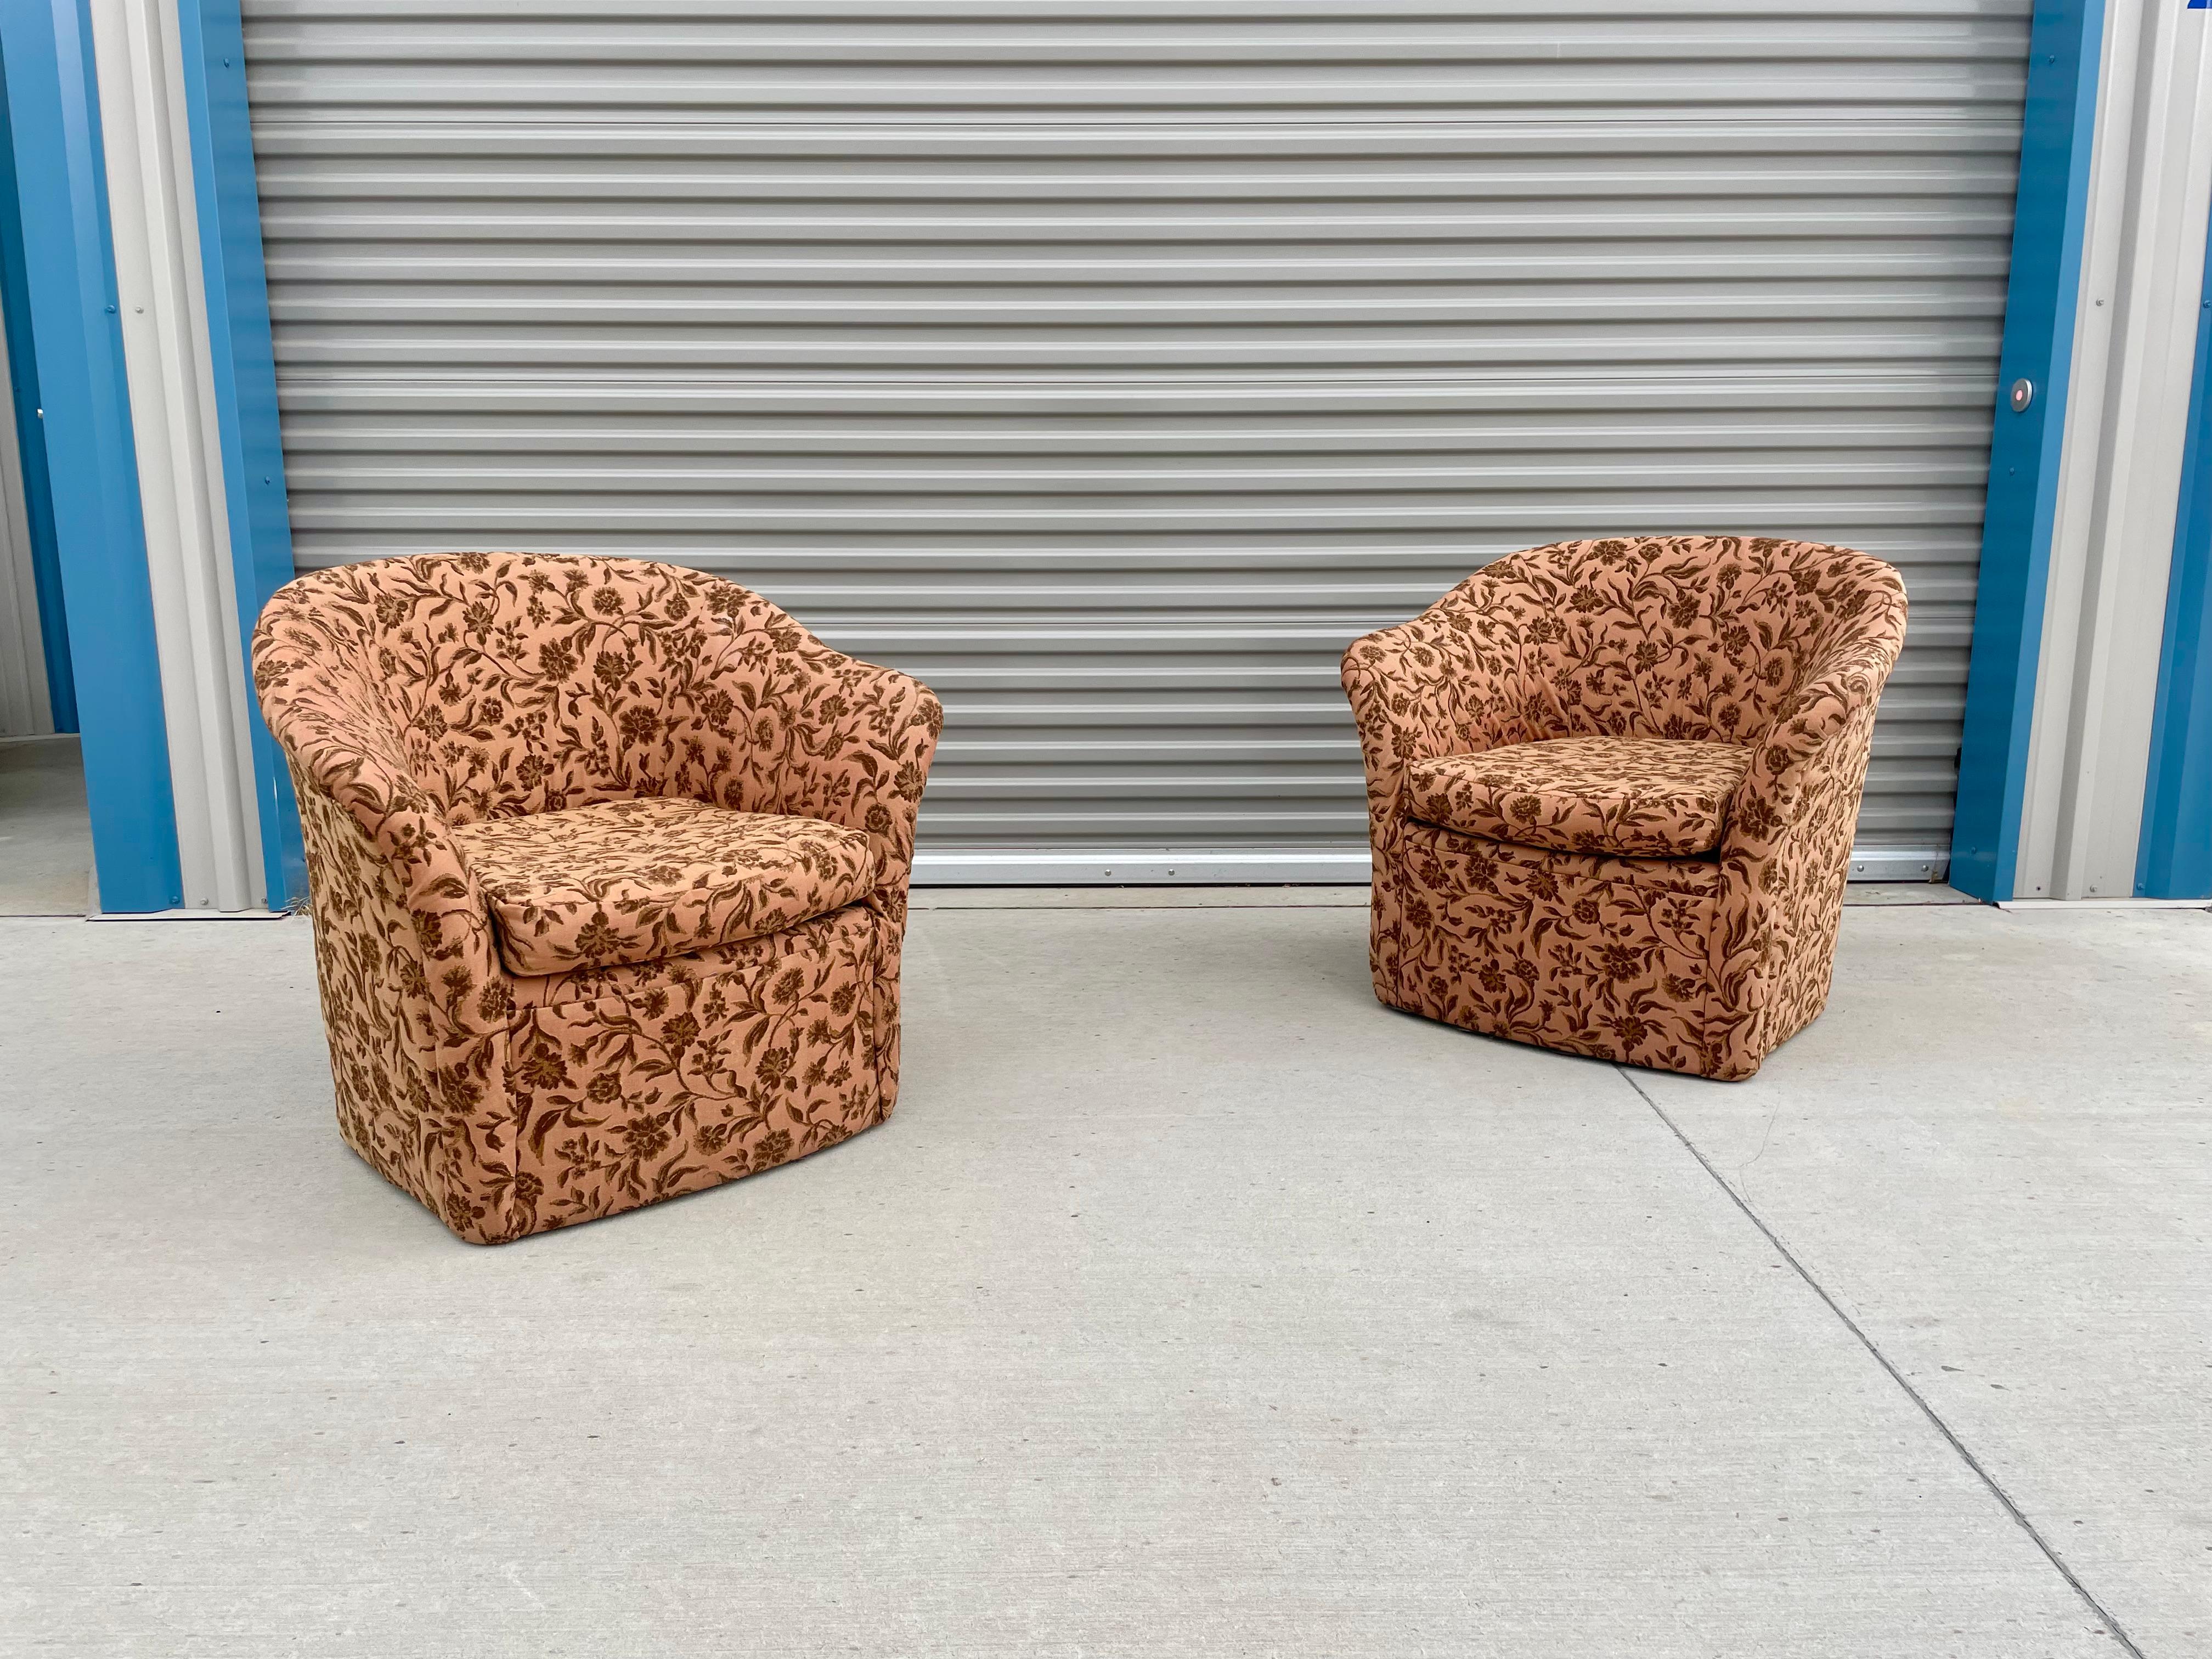 Beautiful mid-century modern lounge chairs designed and manufactured in the United States circa 1970s. These chairs feature a lovely flower-style upholstery giving them that vintage style while also making the chairs come together. The chairs also